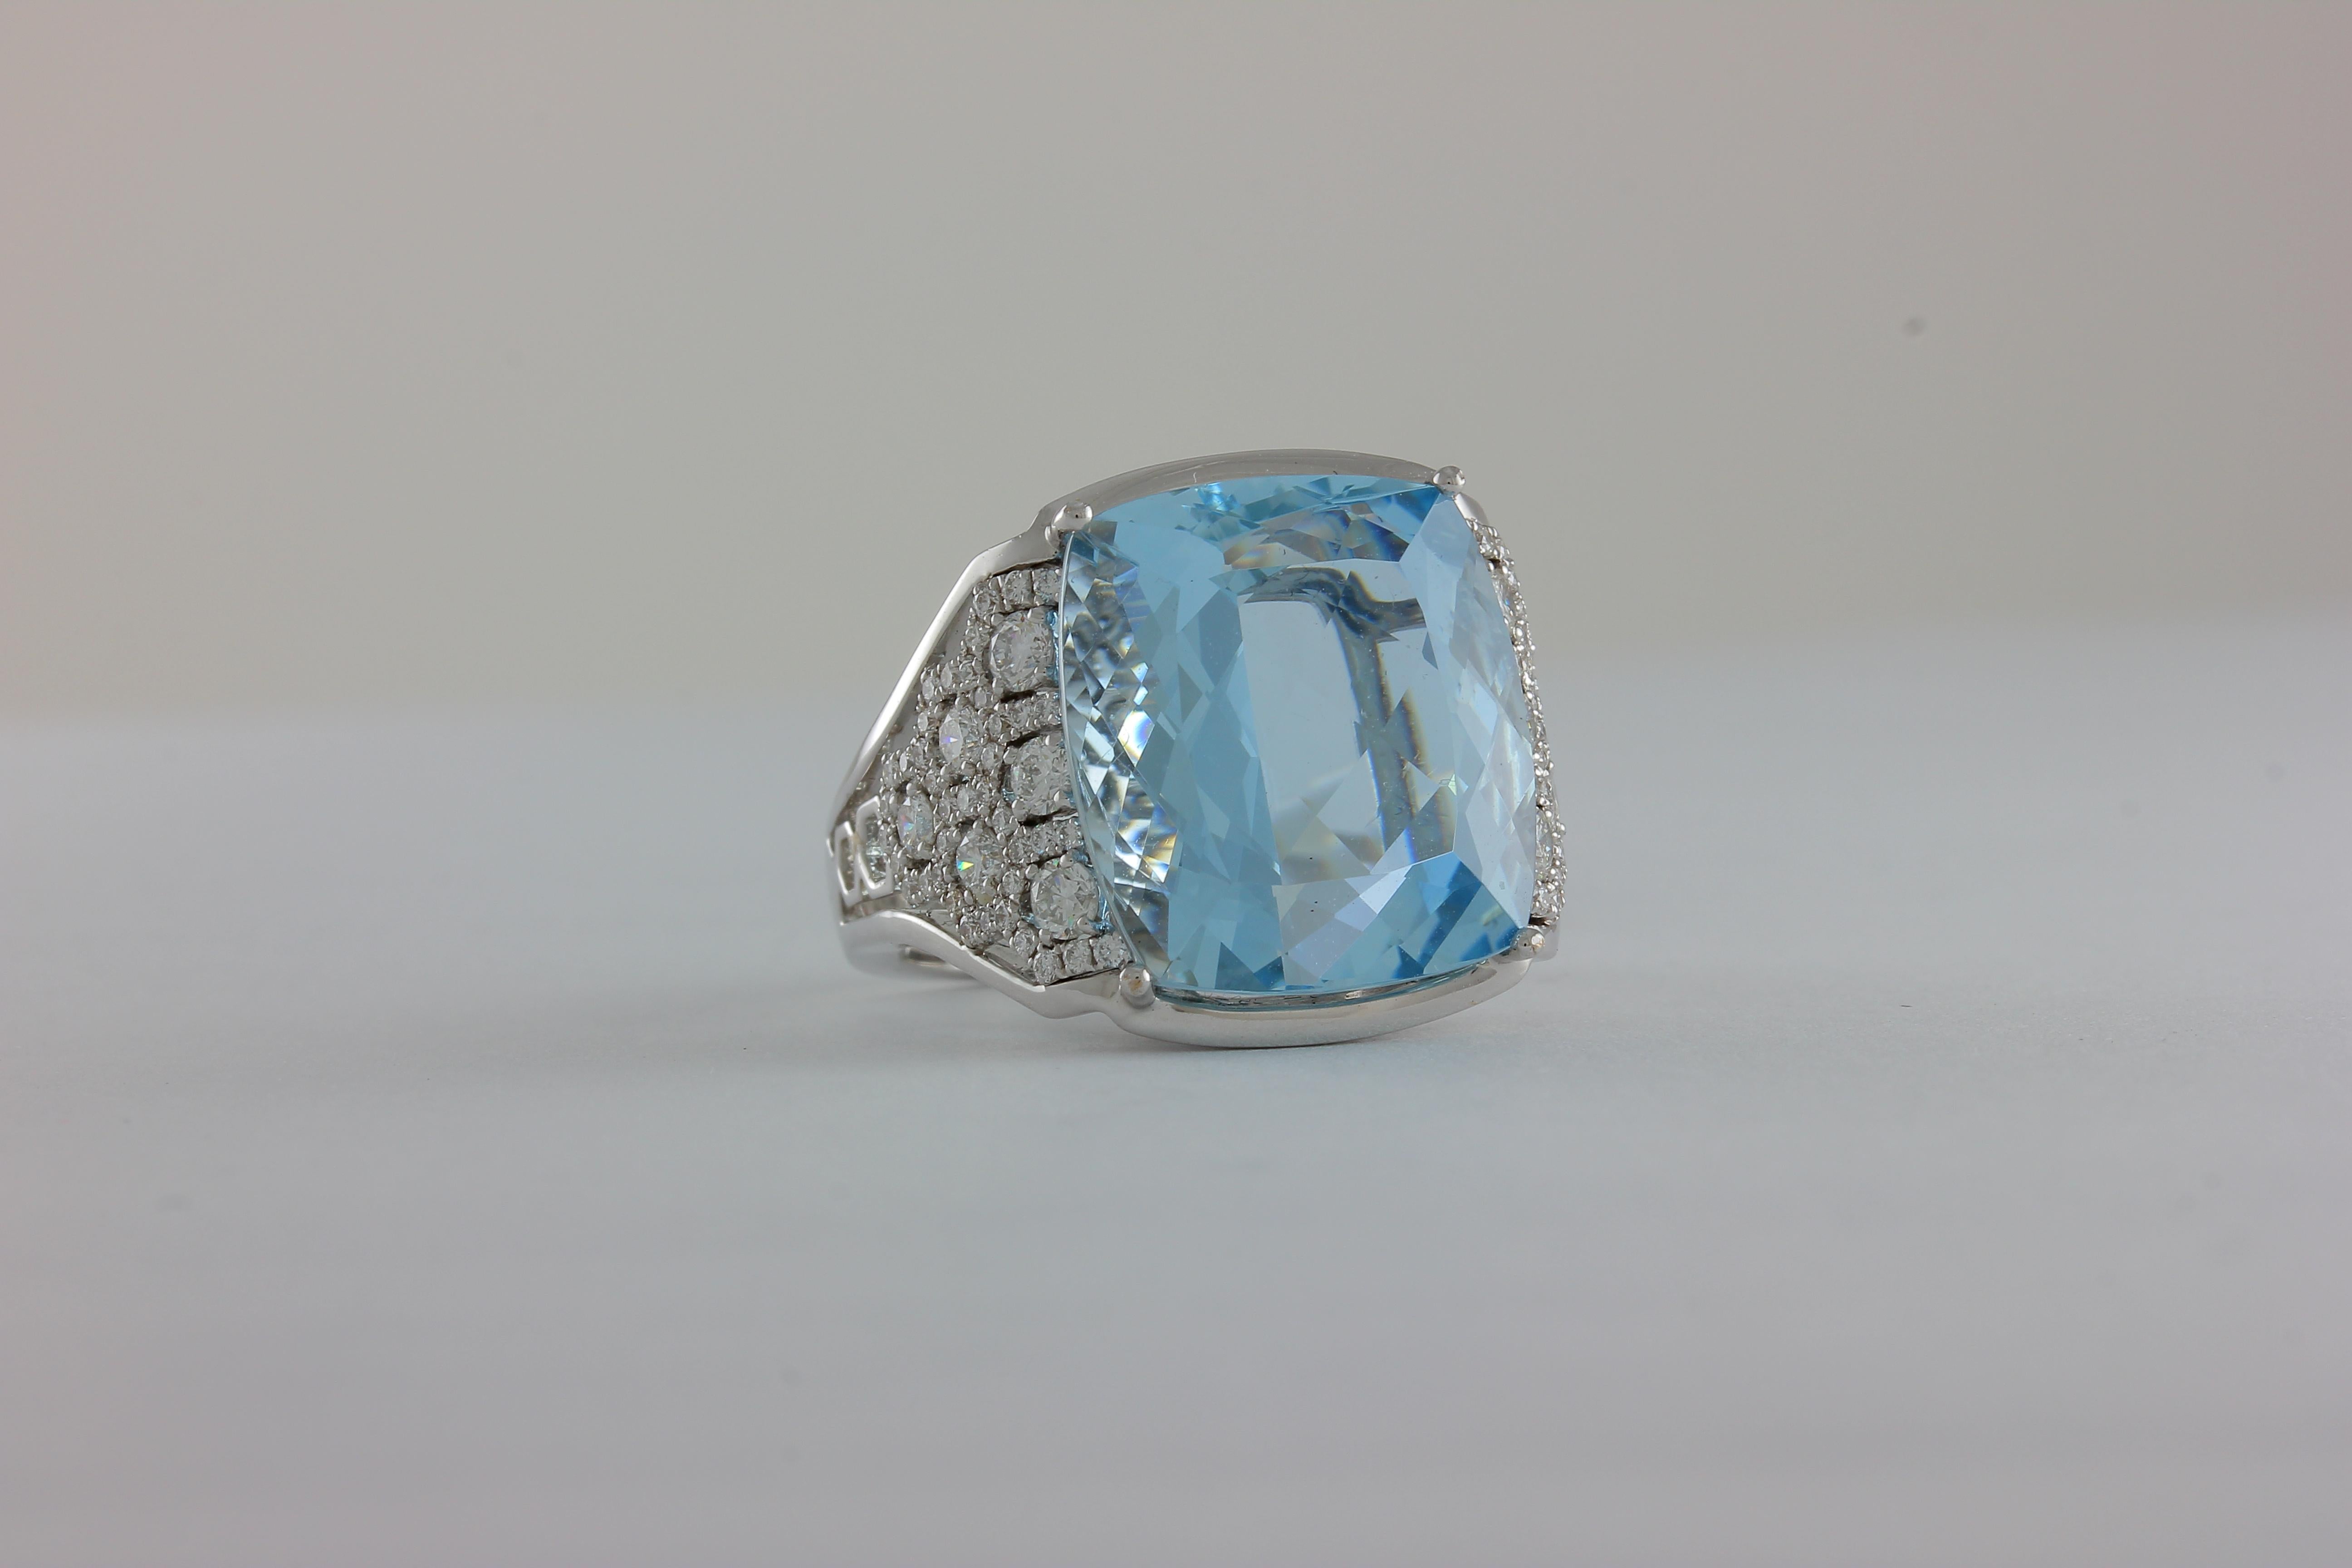 One-of-a-kind Frederic Sage cushion-shaped Aquamarine ring with graduating microset diamond cluster accents set in 18 karat white gold

Total Aquamarine weight: 14.17 ct
Total diamond count: 92
Total diamond weight: 0.90 ct
Finger size: 7